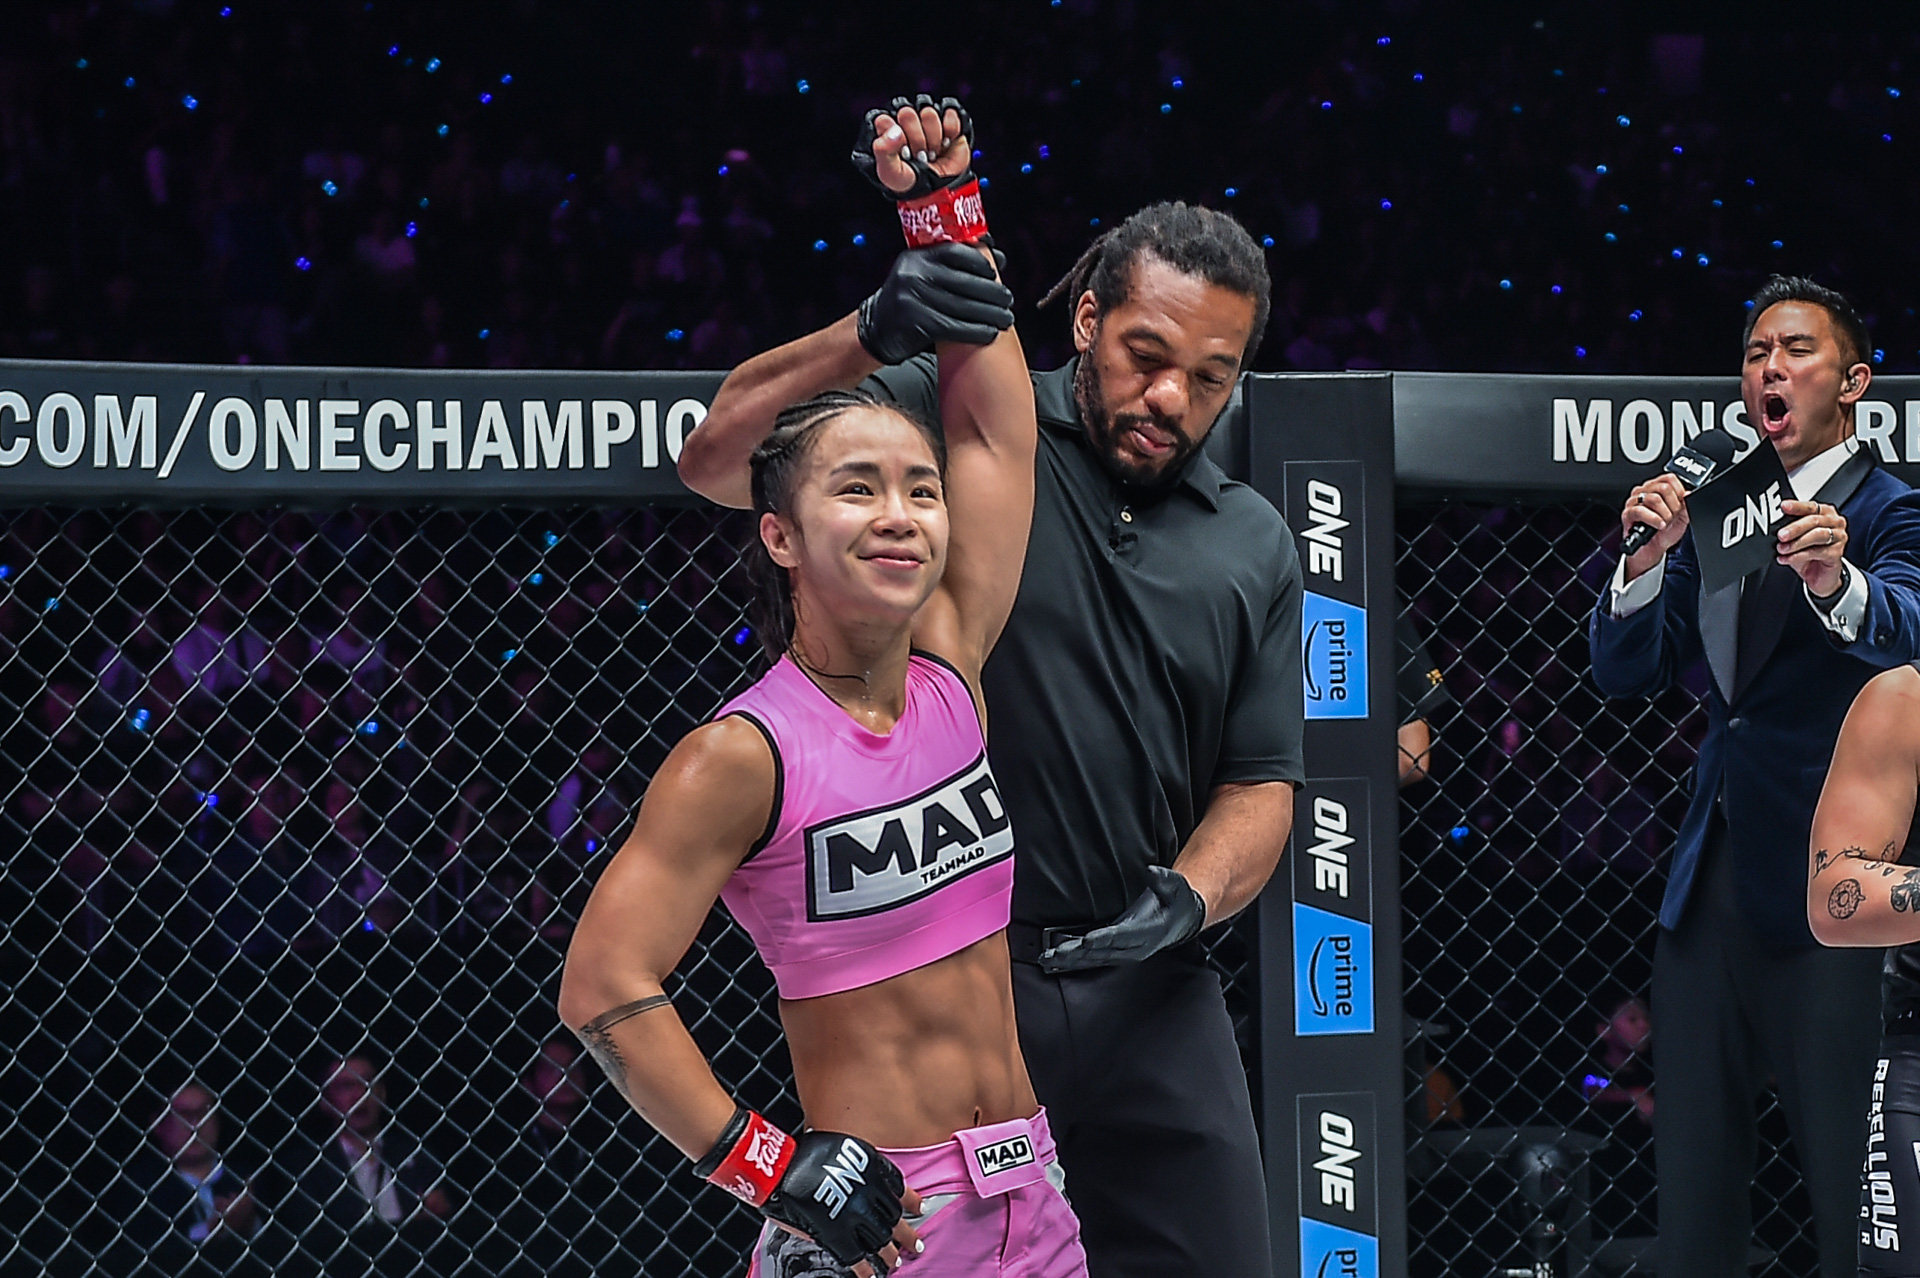 Referee Herb Dean raises Ham Seo-hee’s hand after her decision win over Itsuki Hirata at Fight Night 8 in Singapore. Photo: ONE Championship